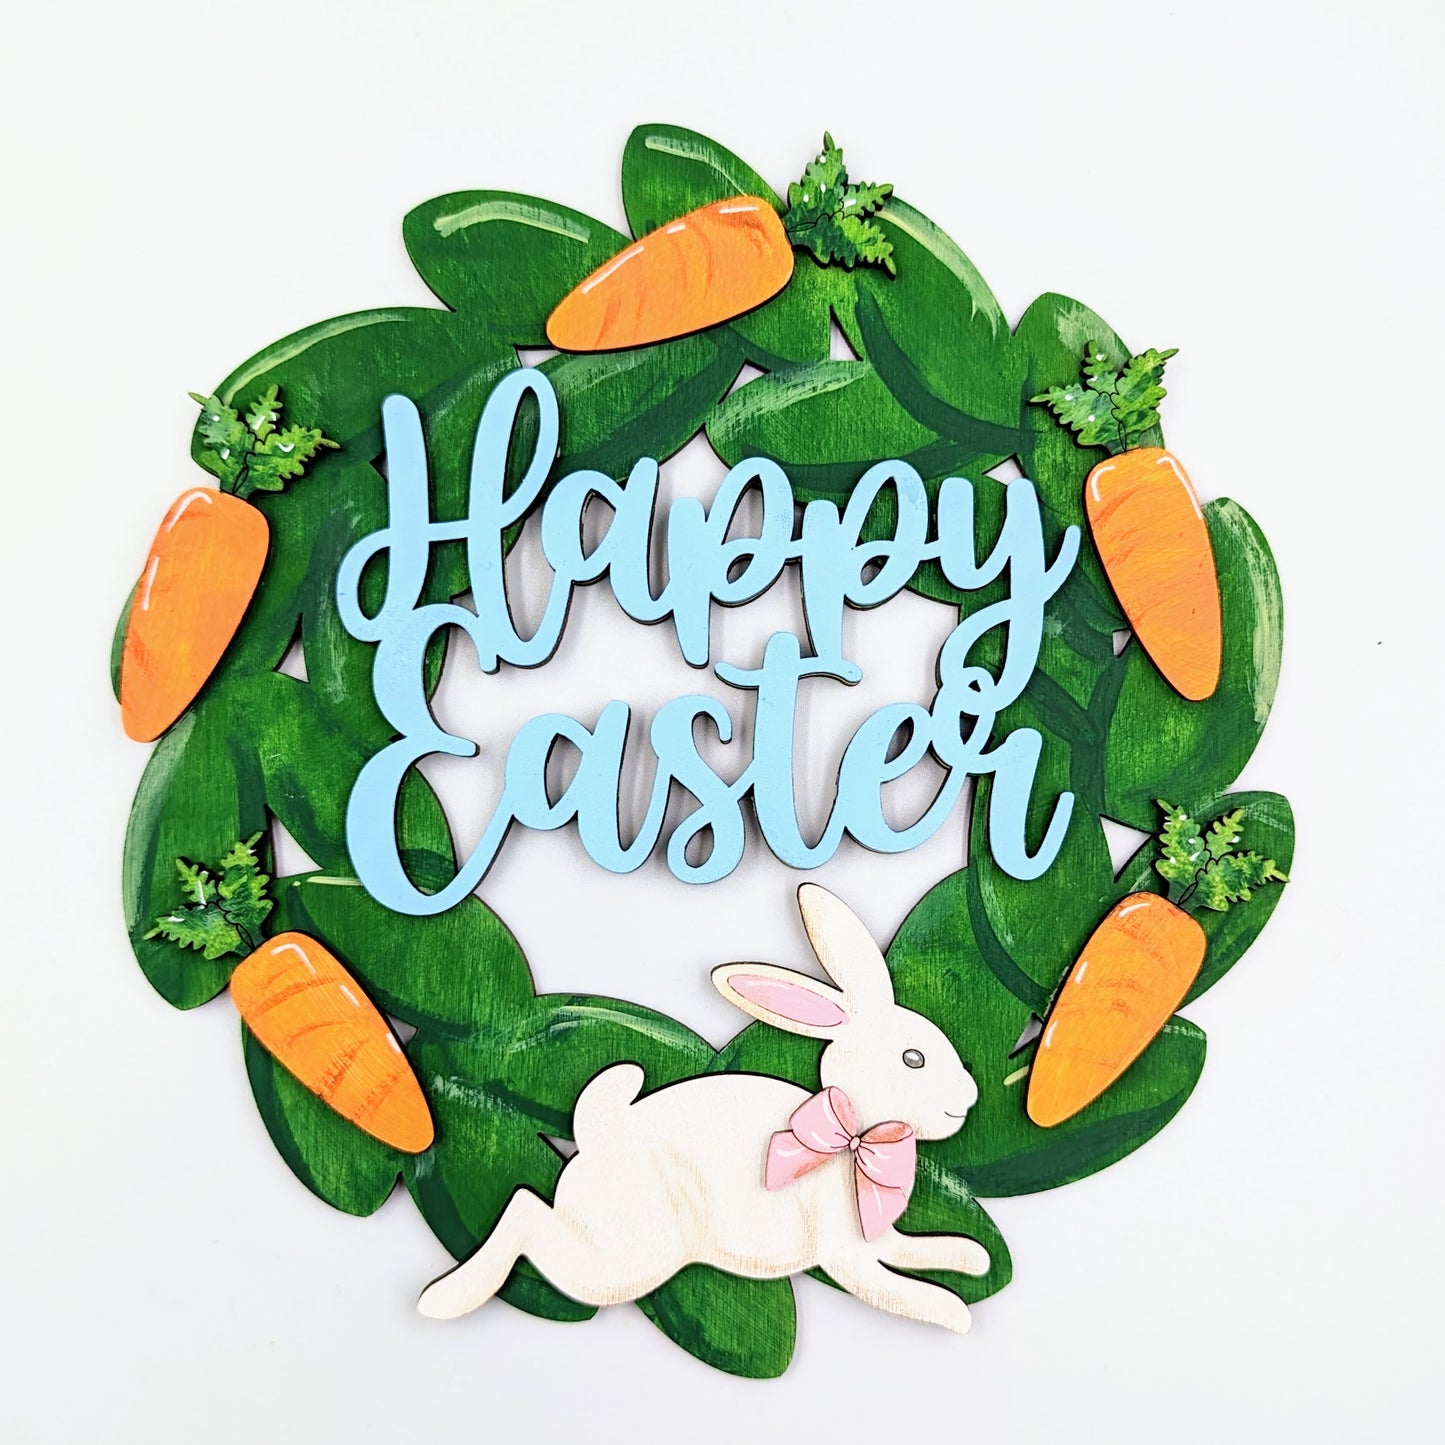 Hand-painted wooden Easter wreath with bunny and carrots, perfect for decorating your home for the holiday season